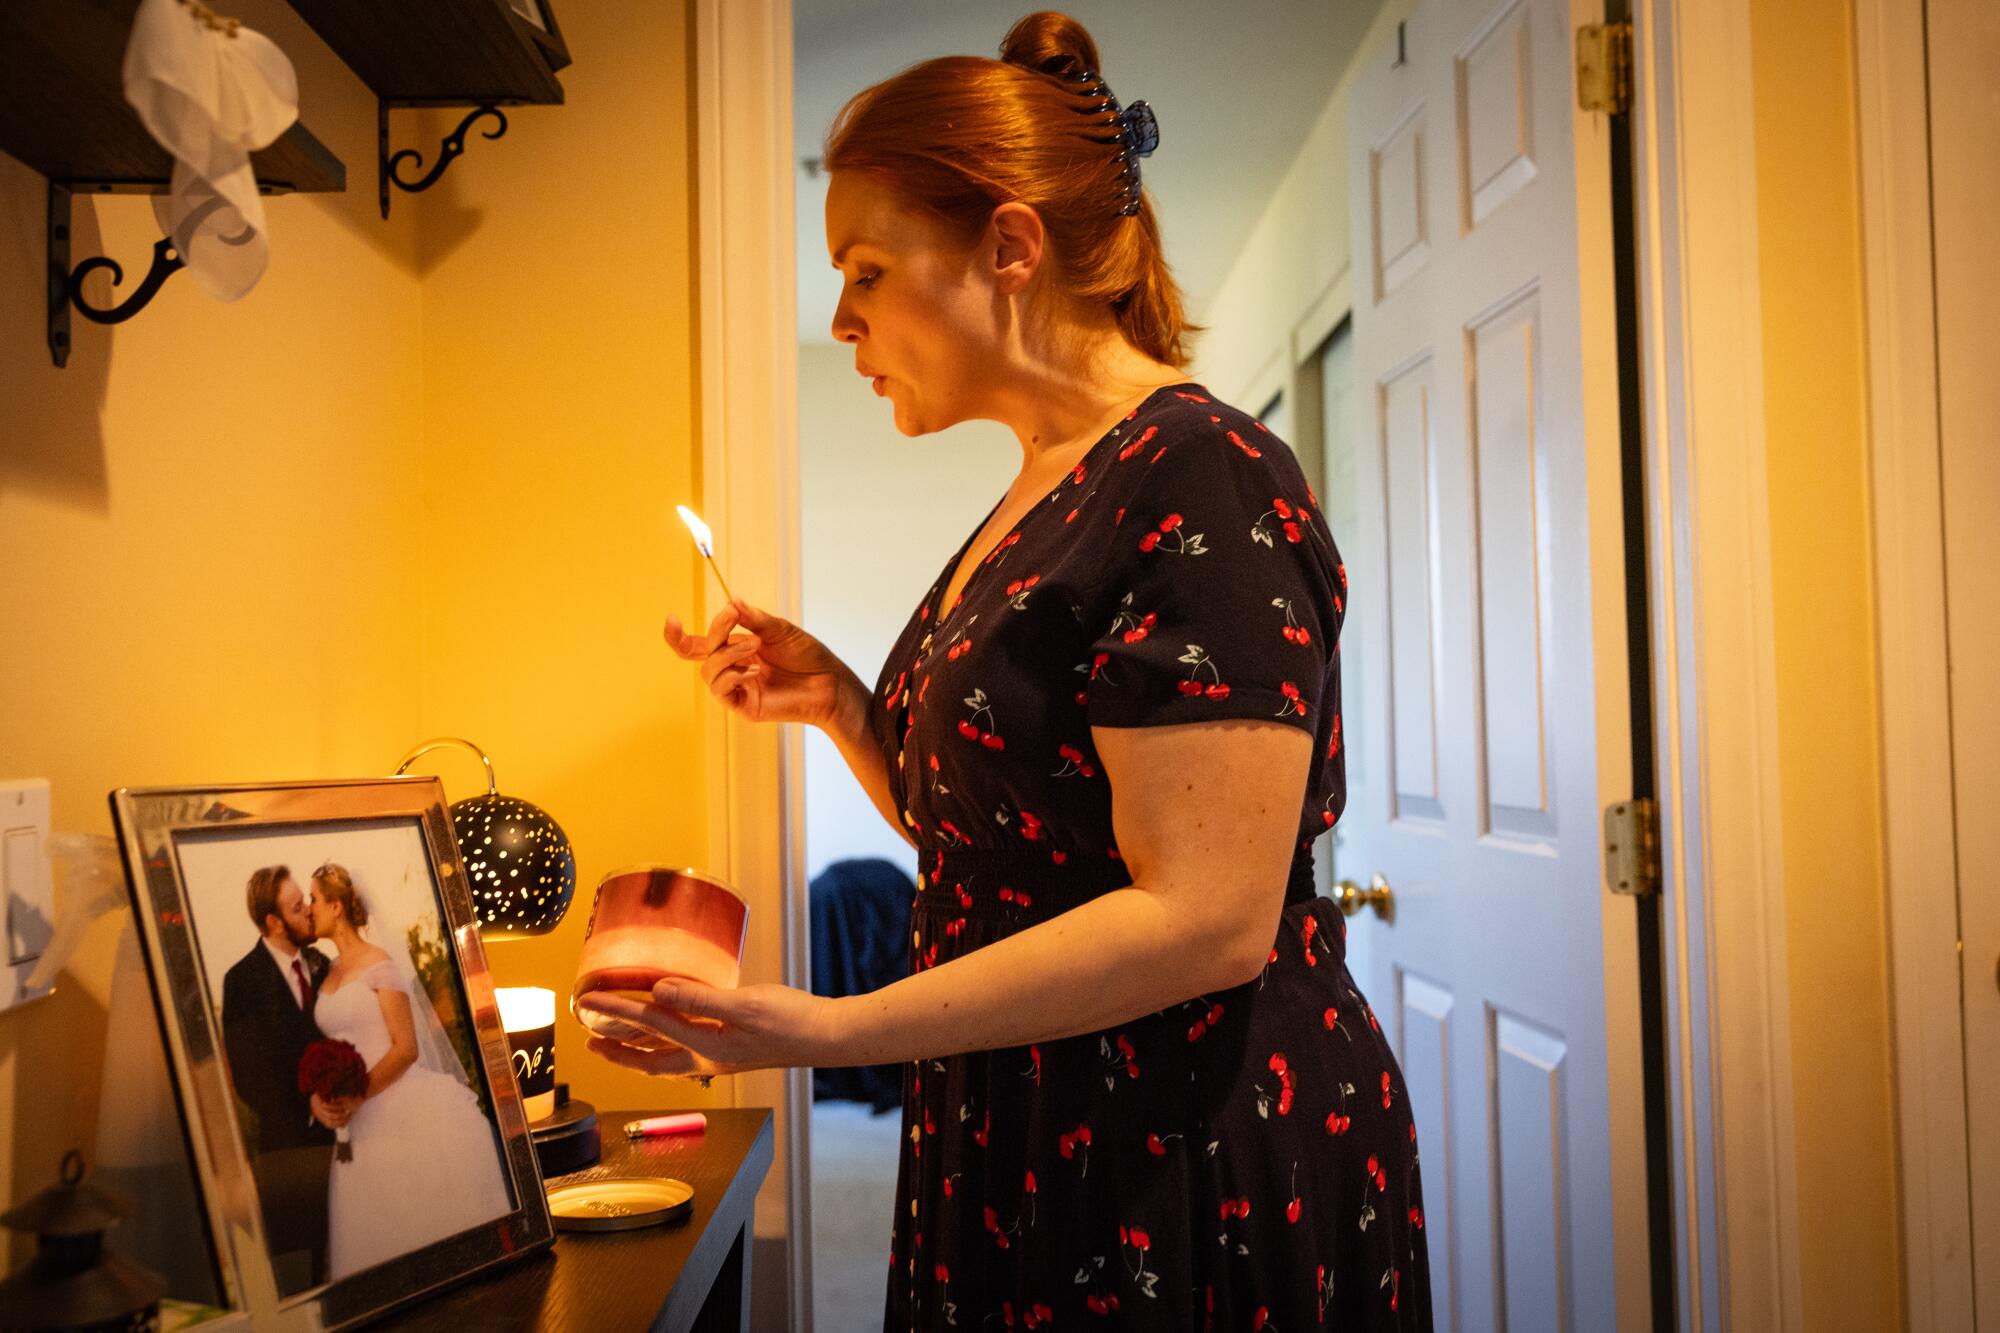  A woman lights a candle next to a photograph.